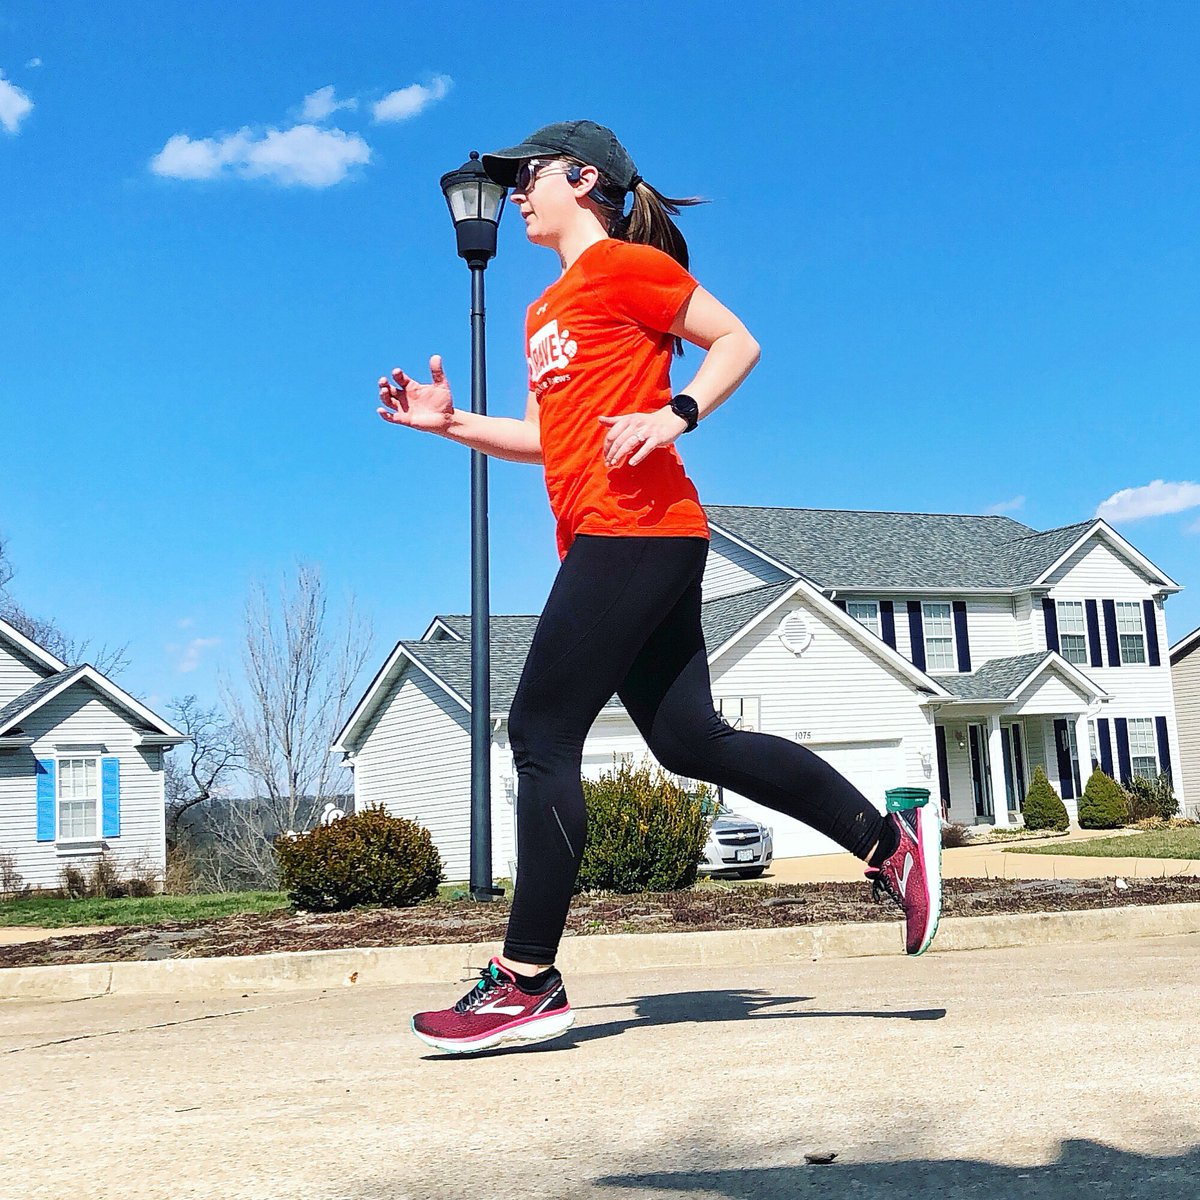 Ran outside 2 times today! 🙌🏻 I could get used to this weather 😍
.
.
#26point2 #shokzsquad #marathontraining #londonmarathon #londonmarathon2019 #shadyraysbr #bibravepro #archcityrunclub #acrc #jcrc #runstl #strongnotskinny #ihavearunnersbody #bibchat